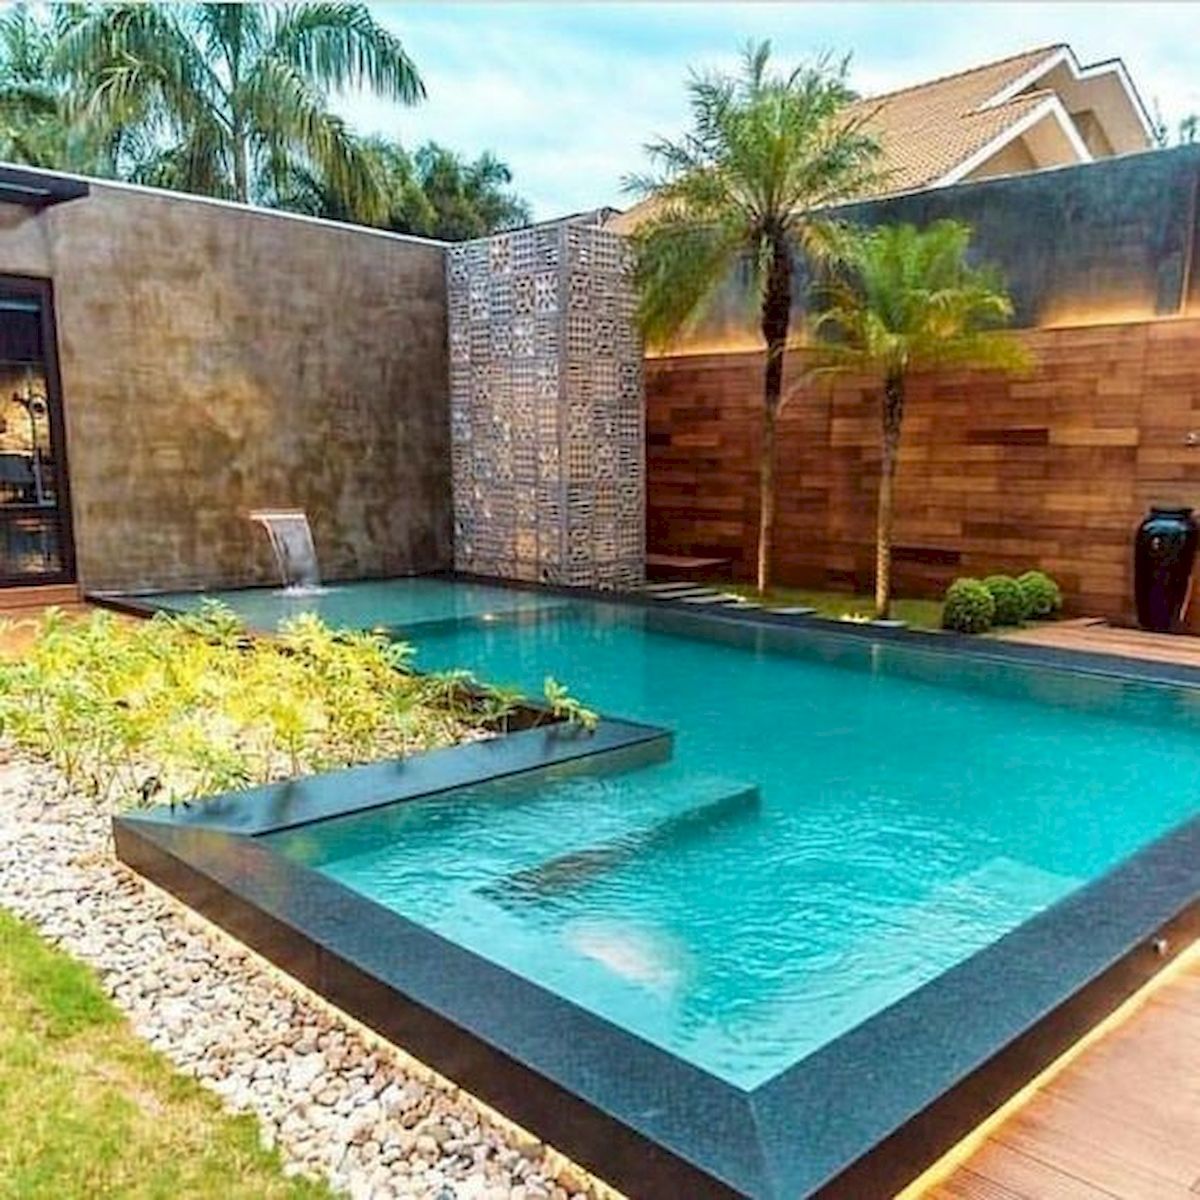 30 Gorgeous Swimming Pools Design Ideas for Backyard in 2020